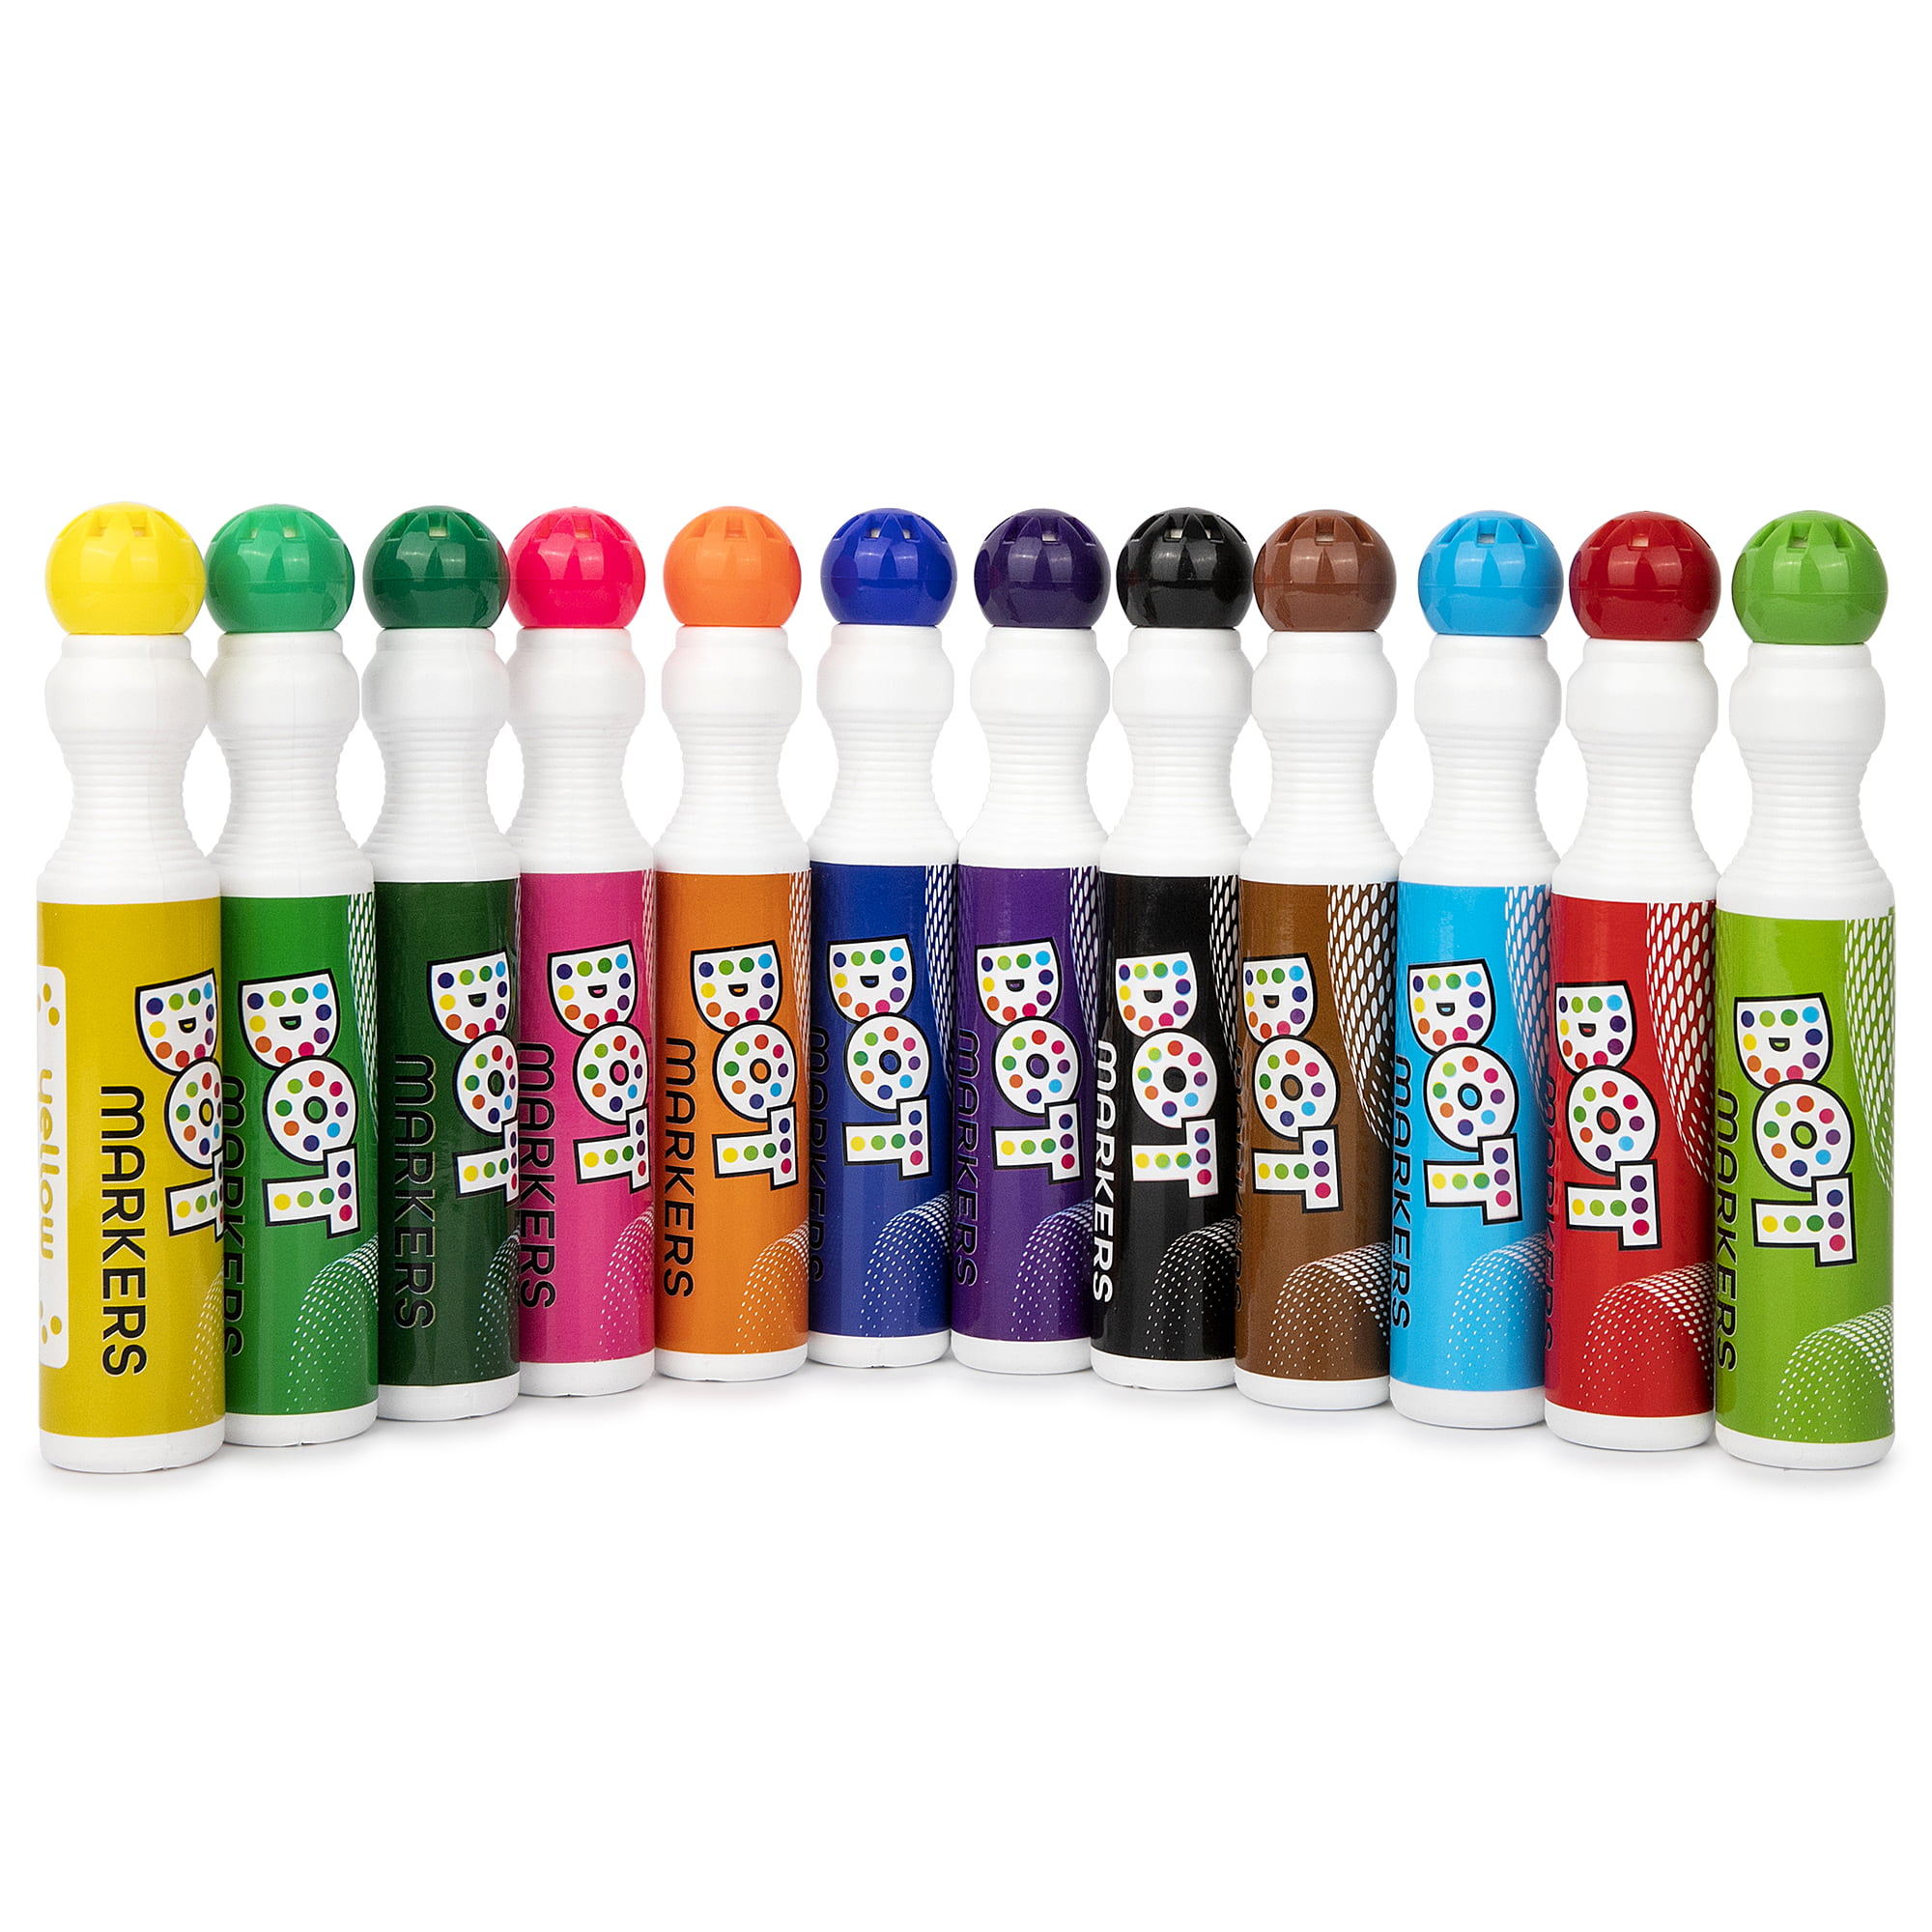  DOODLE HOG Washable Dot Markers for Toddlers Kids Preschool, 8  Colors Bingo Markers, Non Toxic Toddler Arts and Crafts Supplies, Paint  Markers for Kids